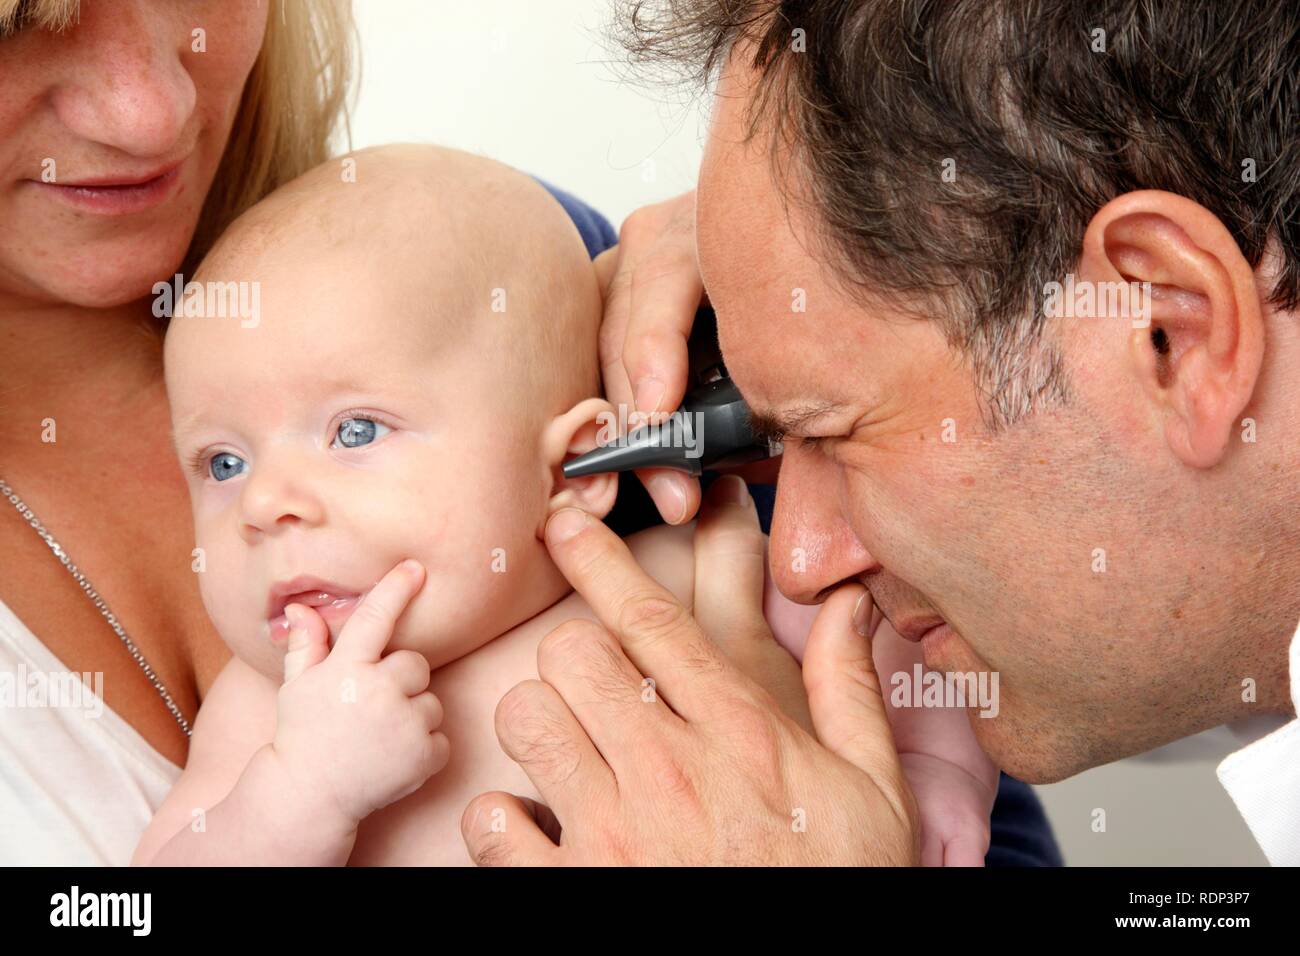 Doctor's surgery, mother and child at the paediatrician's, medical examination of an infant, preventive medical examination Stock Photo